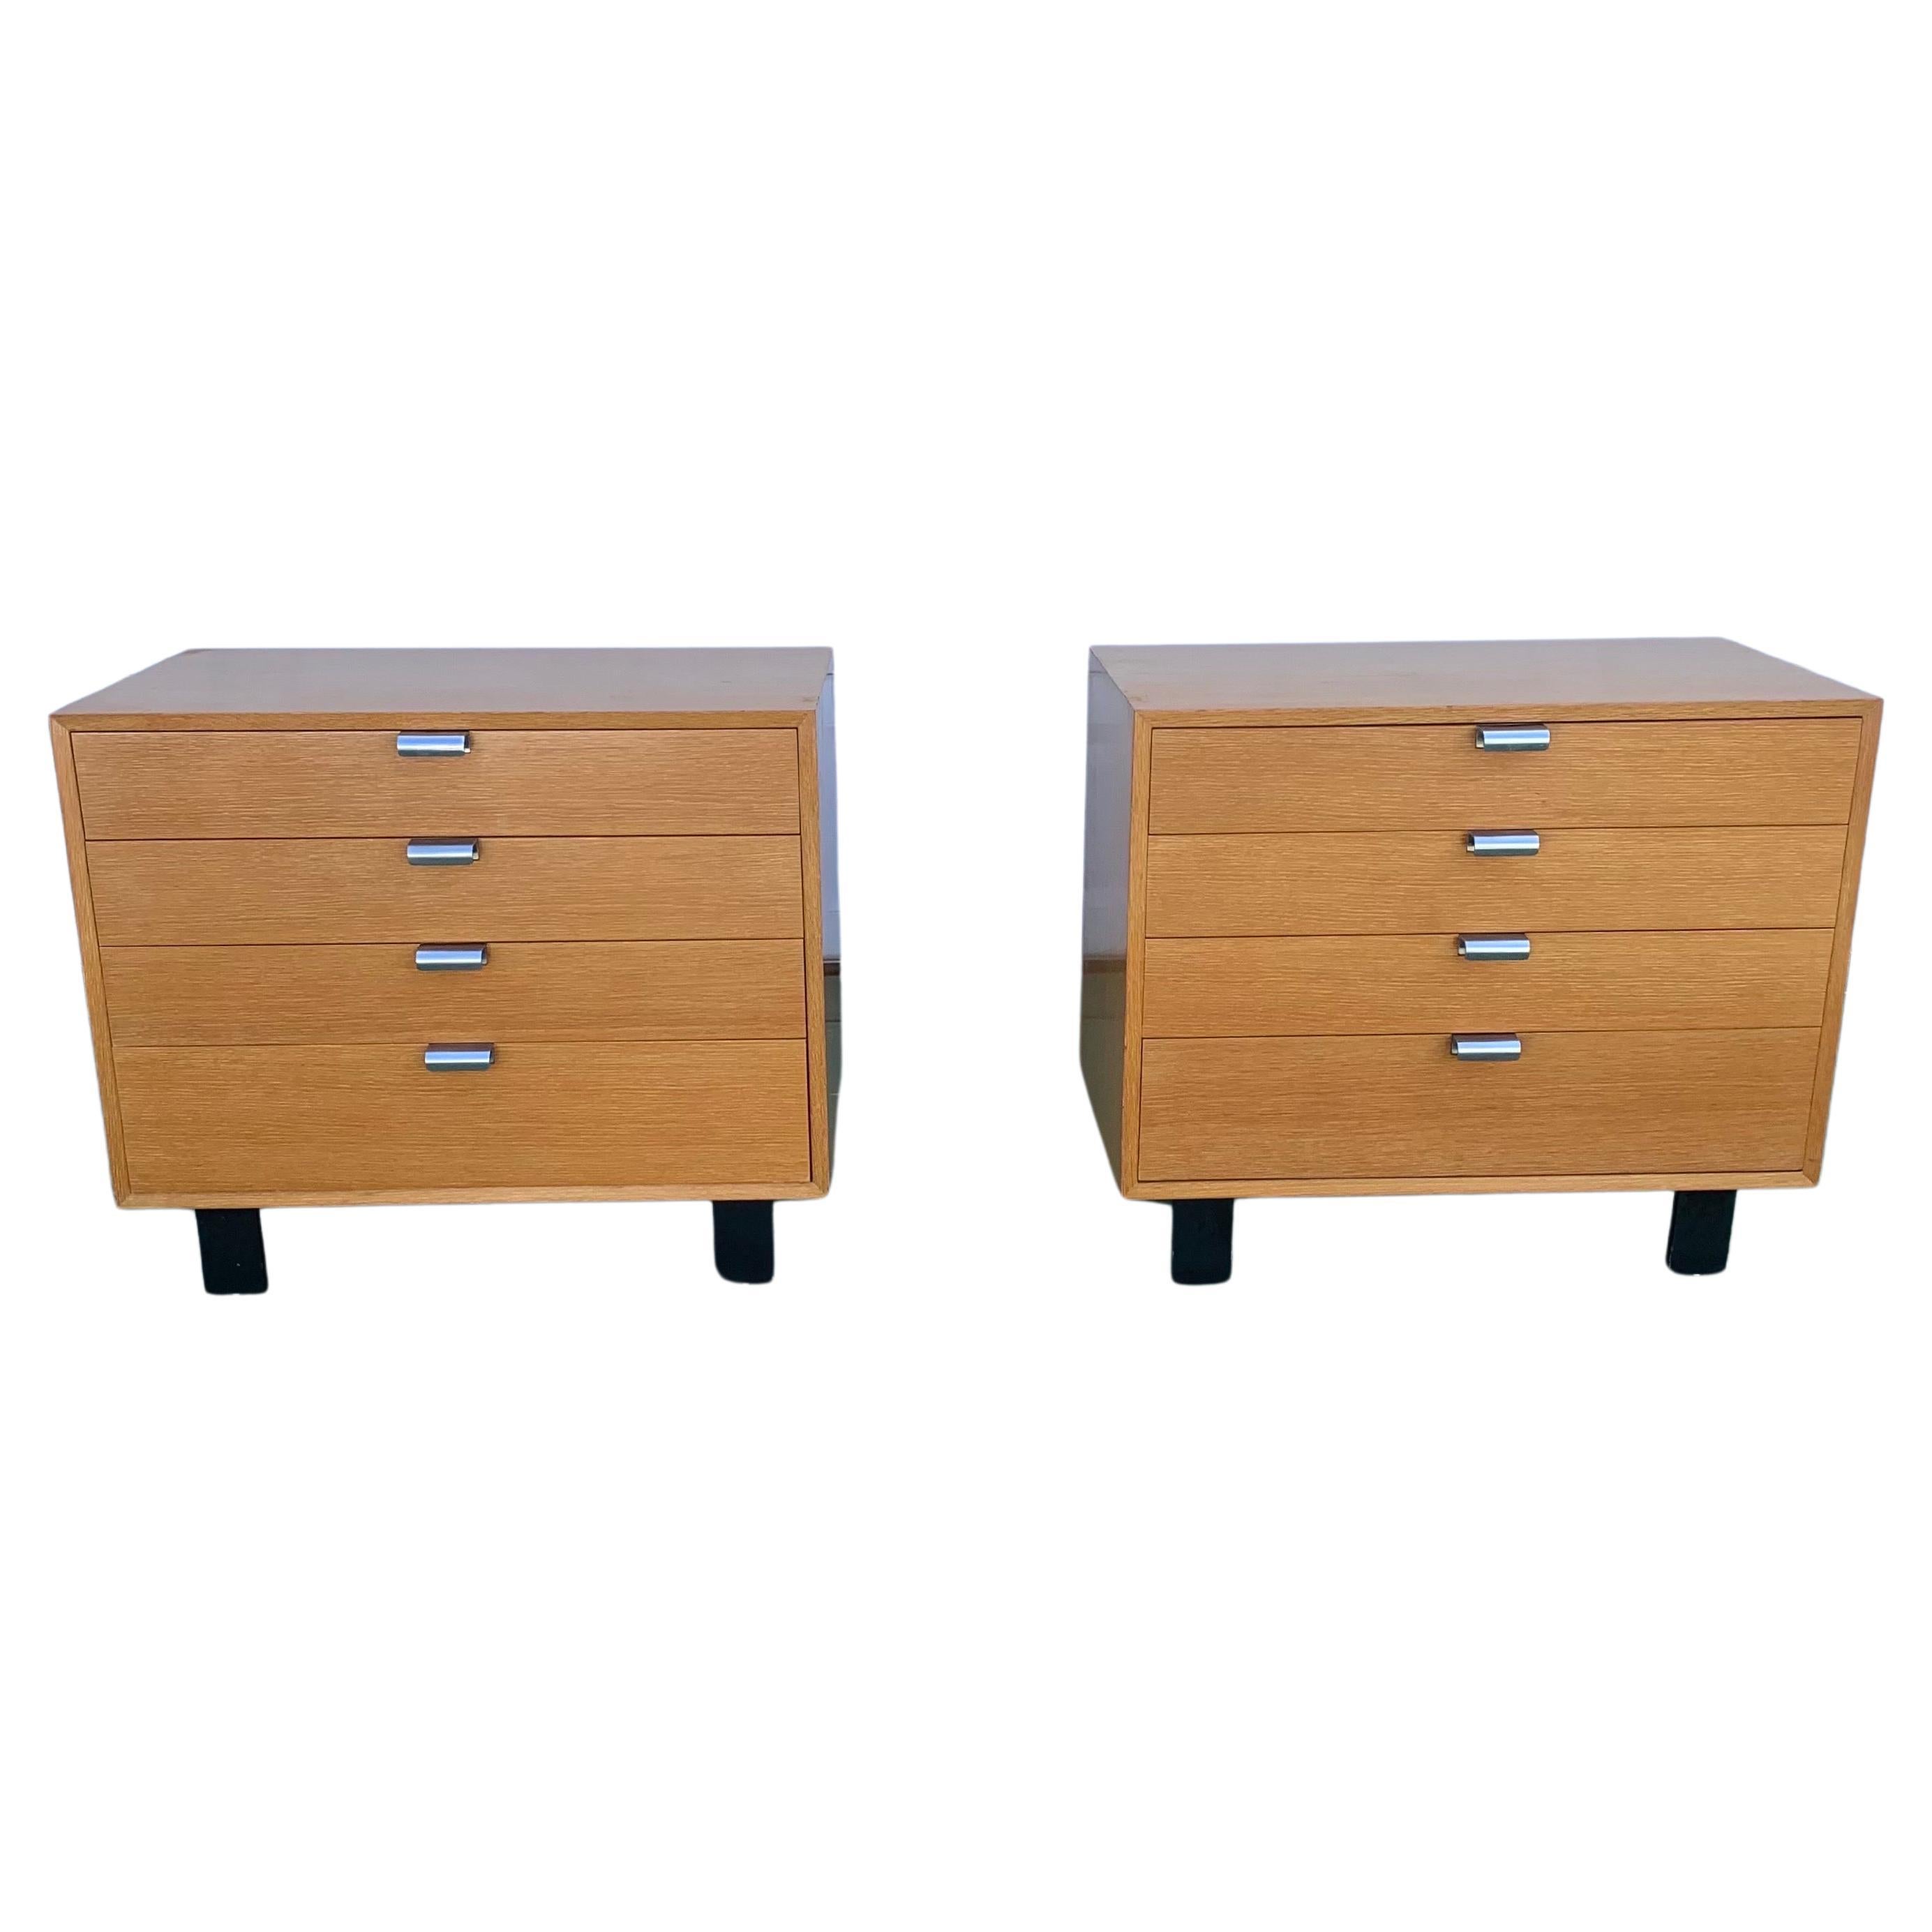 George Nelson for Herman Miller Chests/Dressers, a Pair For Sale